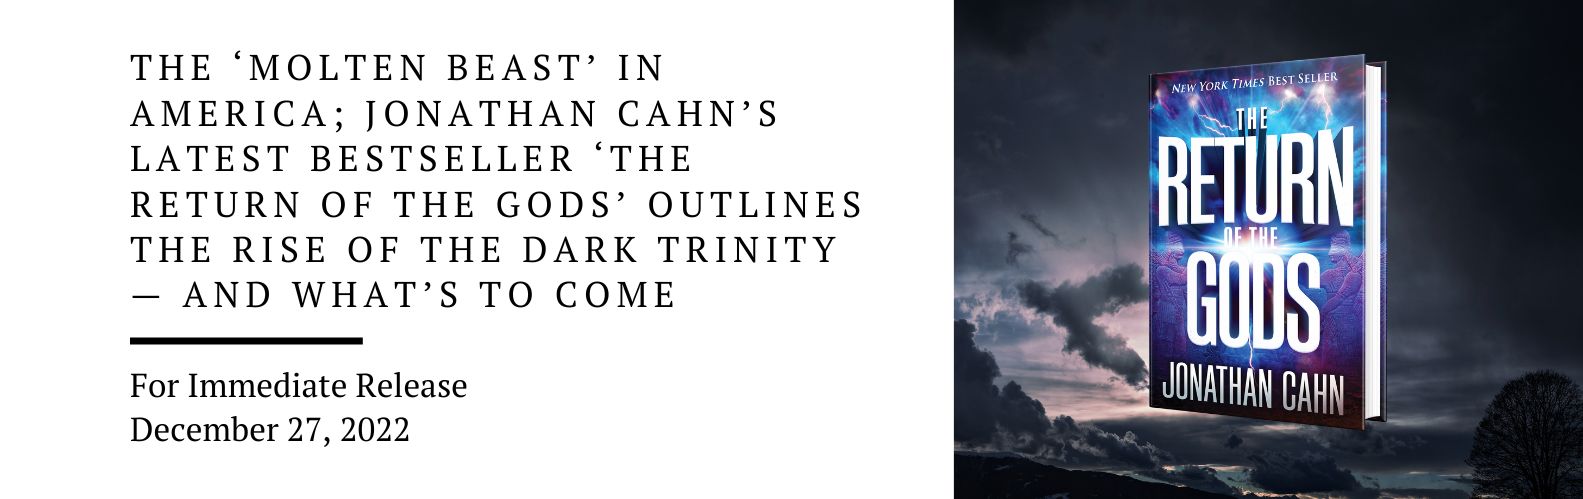 The ‘molten beast’ in America; Jonathan Cahn’s latest bestseller ‘The Return of the Gods’ outlines the rise of the Dark Trinity — and what’s to come